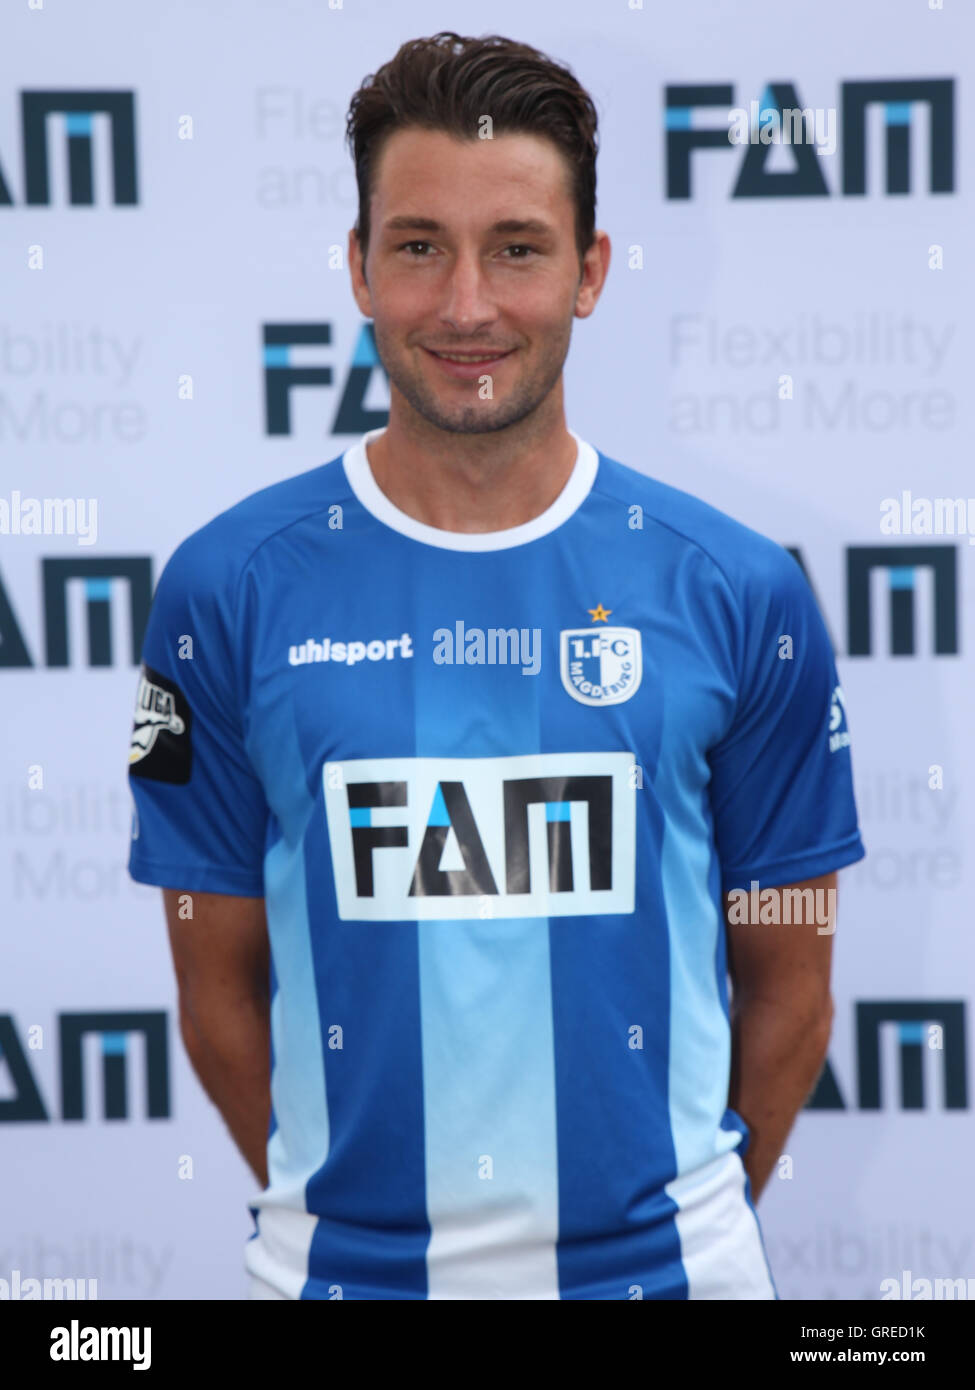 Marius Sowislo 1.Fc Magdeburg Stock Photo